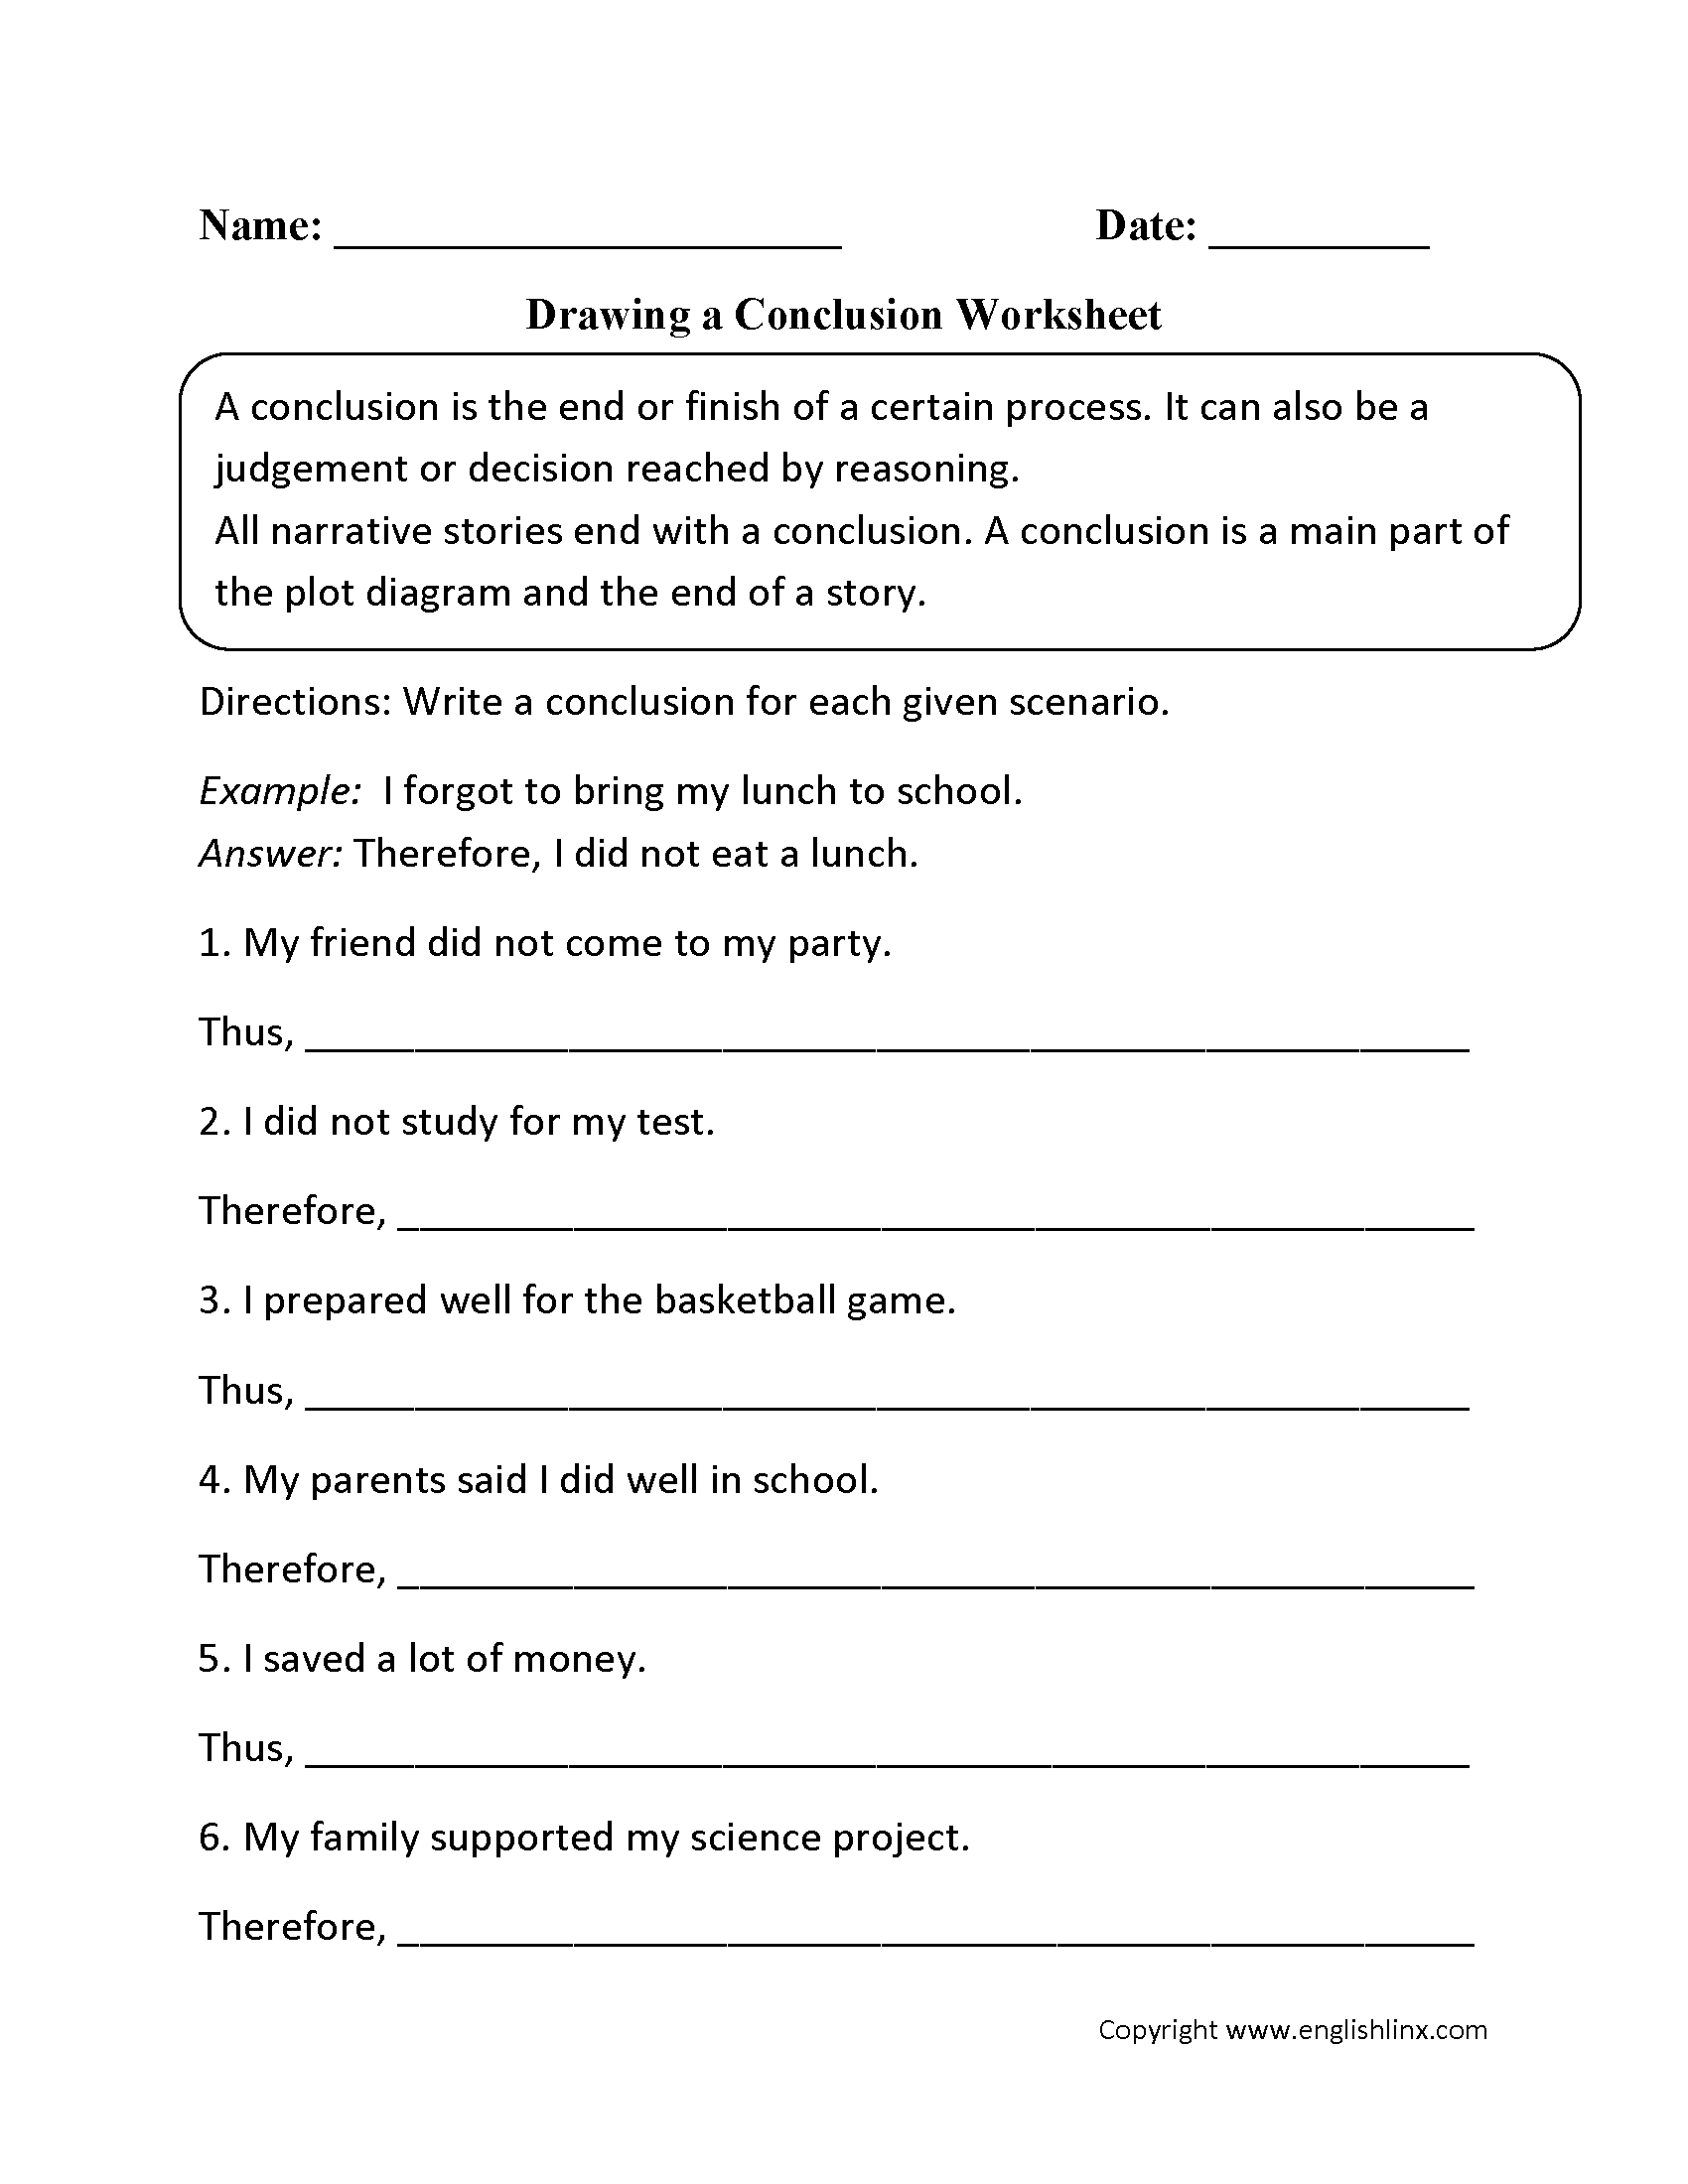 free-drawing-conclusions-worksheets